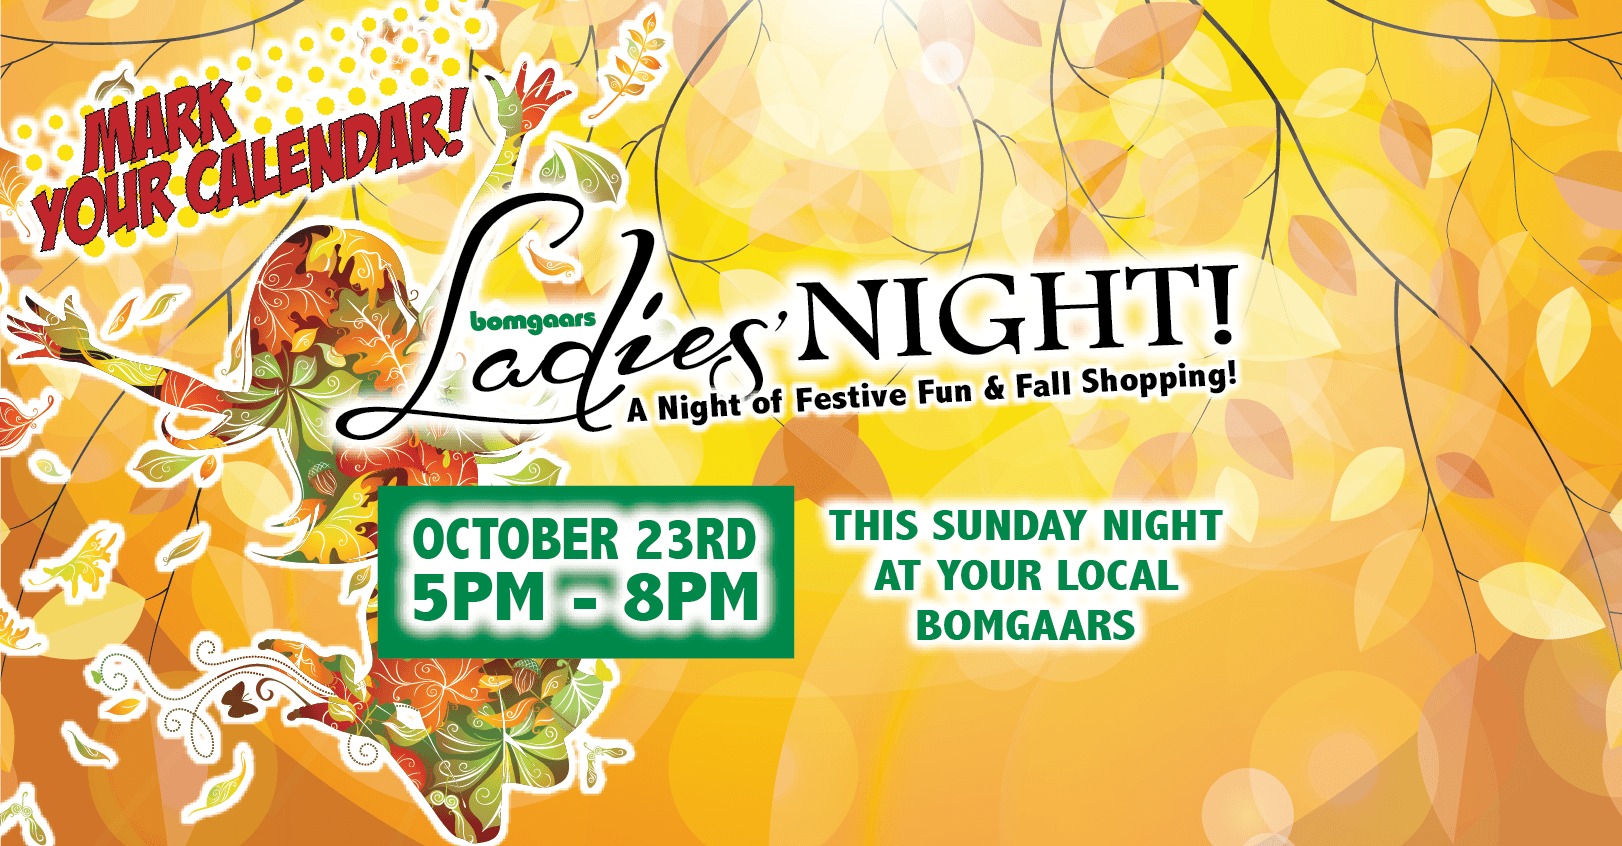 Bomgaars in Sioux Center Ladies Night!